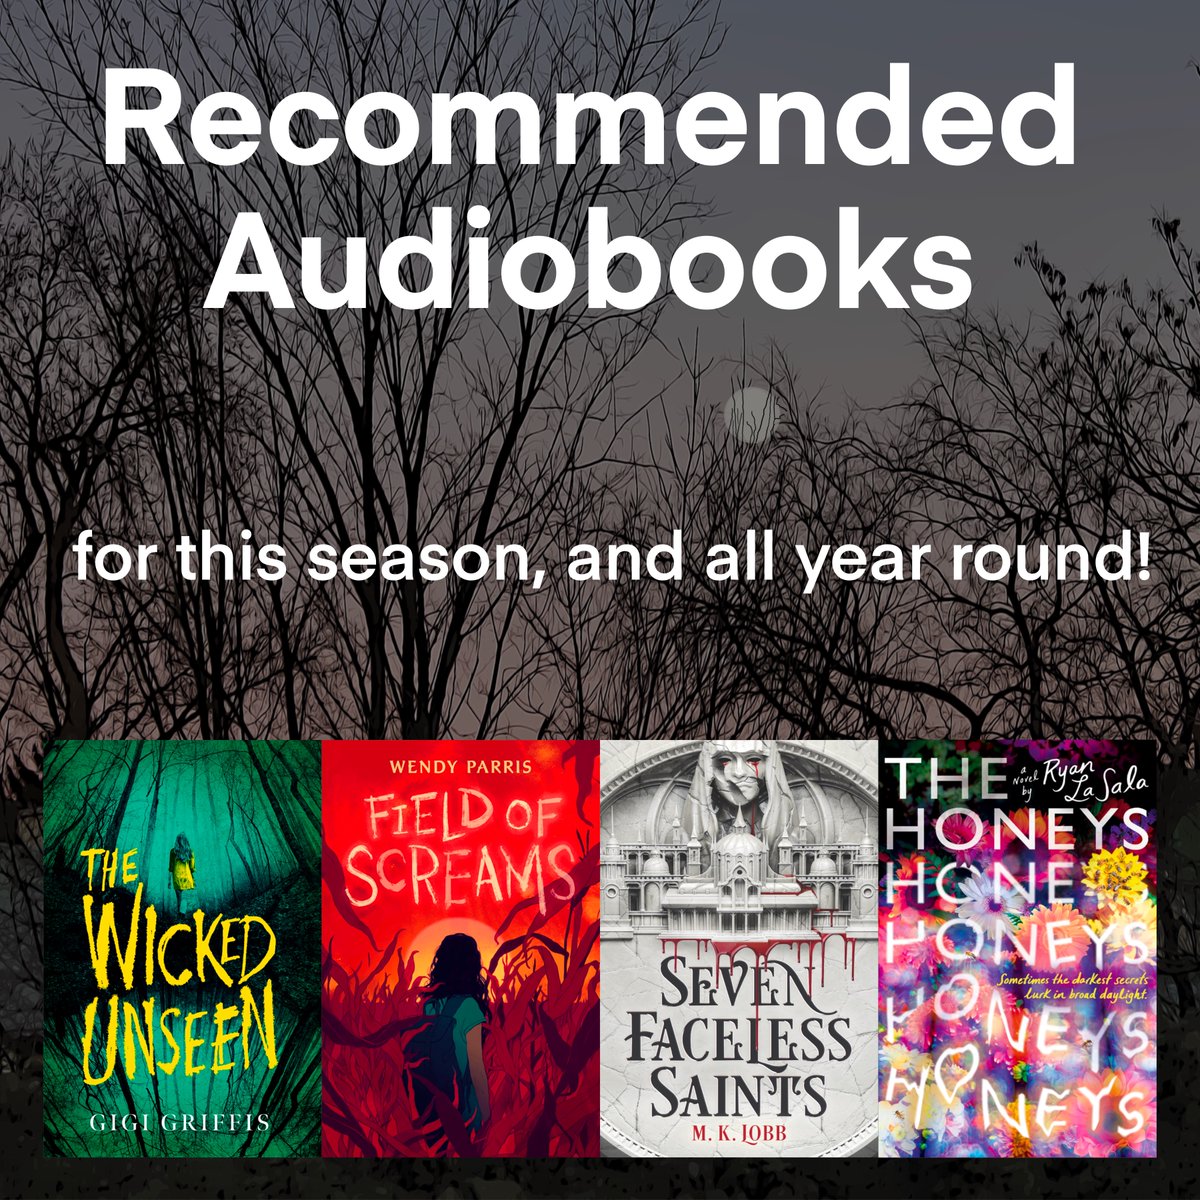 I enjoyed these 4 audiobooks earlier this year. 

They're perfect for this spooky, Halloween season, or any time you'd like a suspenseful, spine-tingling, hair-raising read!

#BookTwitter #LibraryTwitter #RecommendedBooks #BookRecommendations